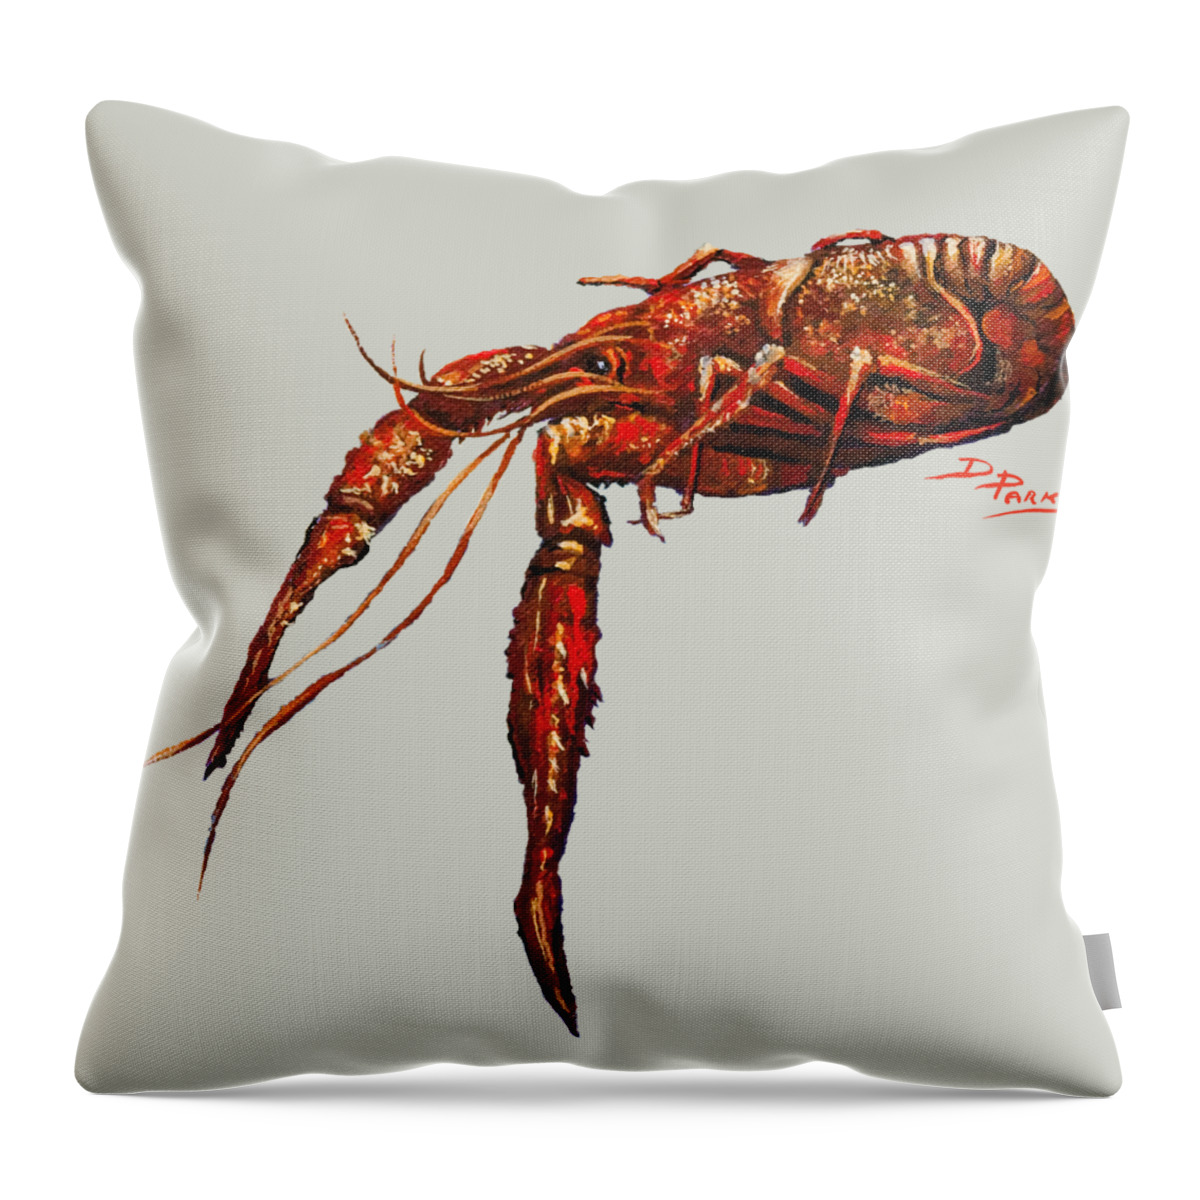  Louisiana Crawfish Throw Pillow featuring the painting Big Red by Dianne Parks